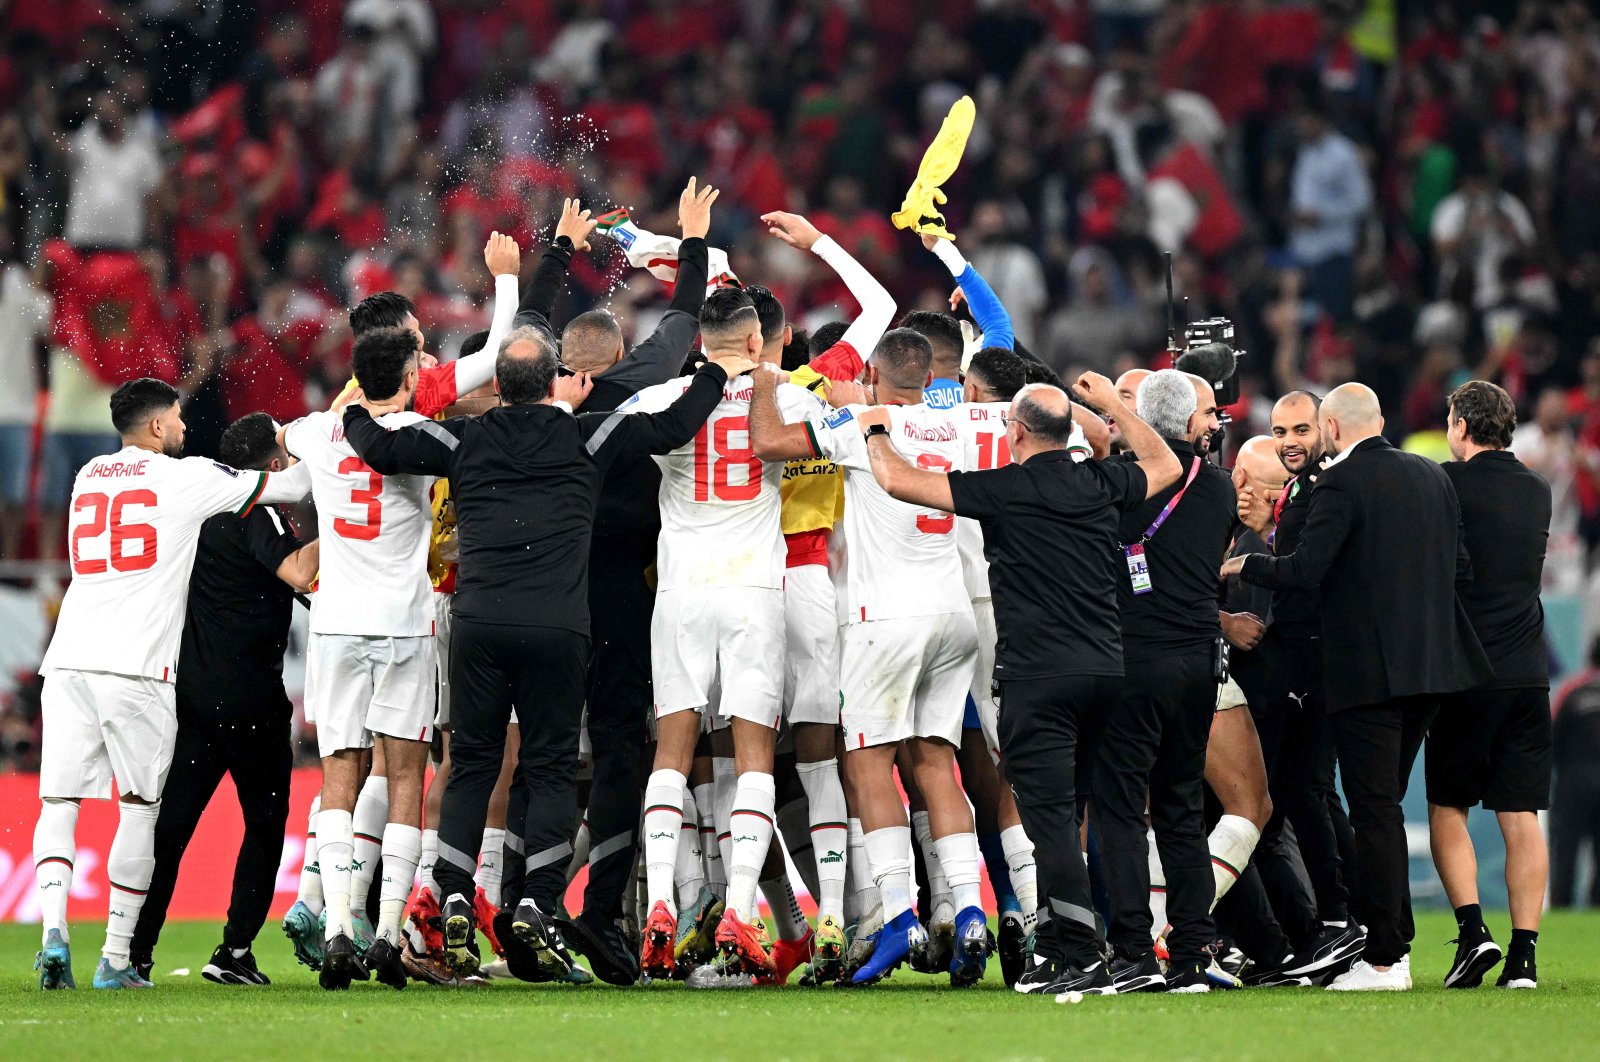 Morocco players and staff members celebrate after they won the Qatar 2022 World Cup Group F football match between Canada and Morocco at the Al-Thumama Stadium to advance to the round of 16, in Doha, Qatar, Dec. 1, 2022. (AFP Photo)